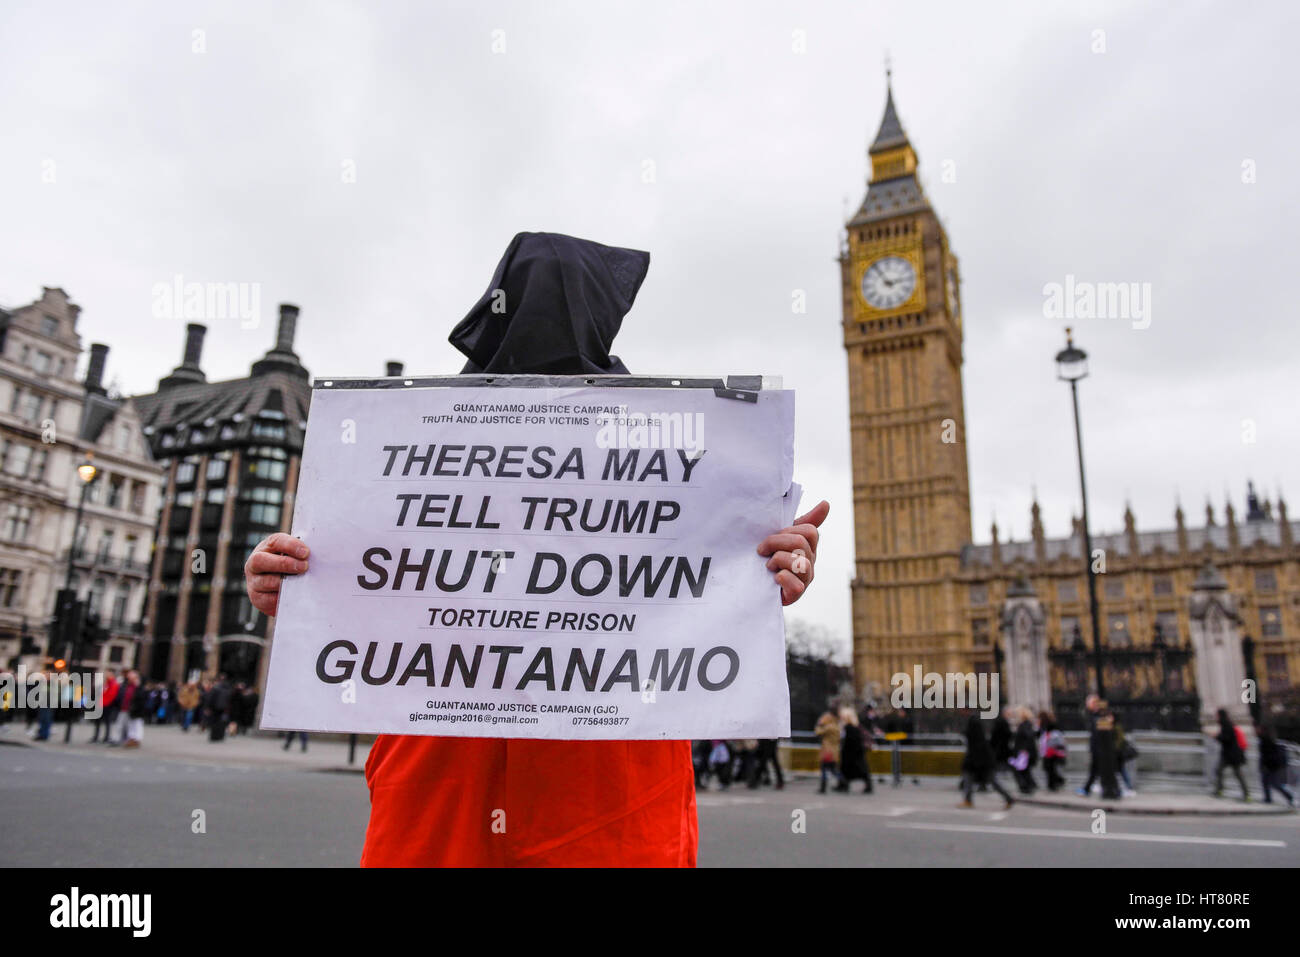 London, UK.  8 March 2017.  A member of Guantanamo Justice Campaign, wearing a prisoner's hood, takes part in a protest in Parliament Square opposite the Houses of Parliament demanding that Donald Trump, President of the United States, close Guantanamo Bay concentration camp and calling on Theresa May, Prime Minister, to seek representations from President Trump that it will be a closure, not a relocation to a mainland US prison.  Credit: Stephen Chung / Alamy Live News Stock Photo